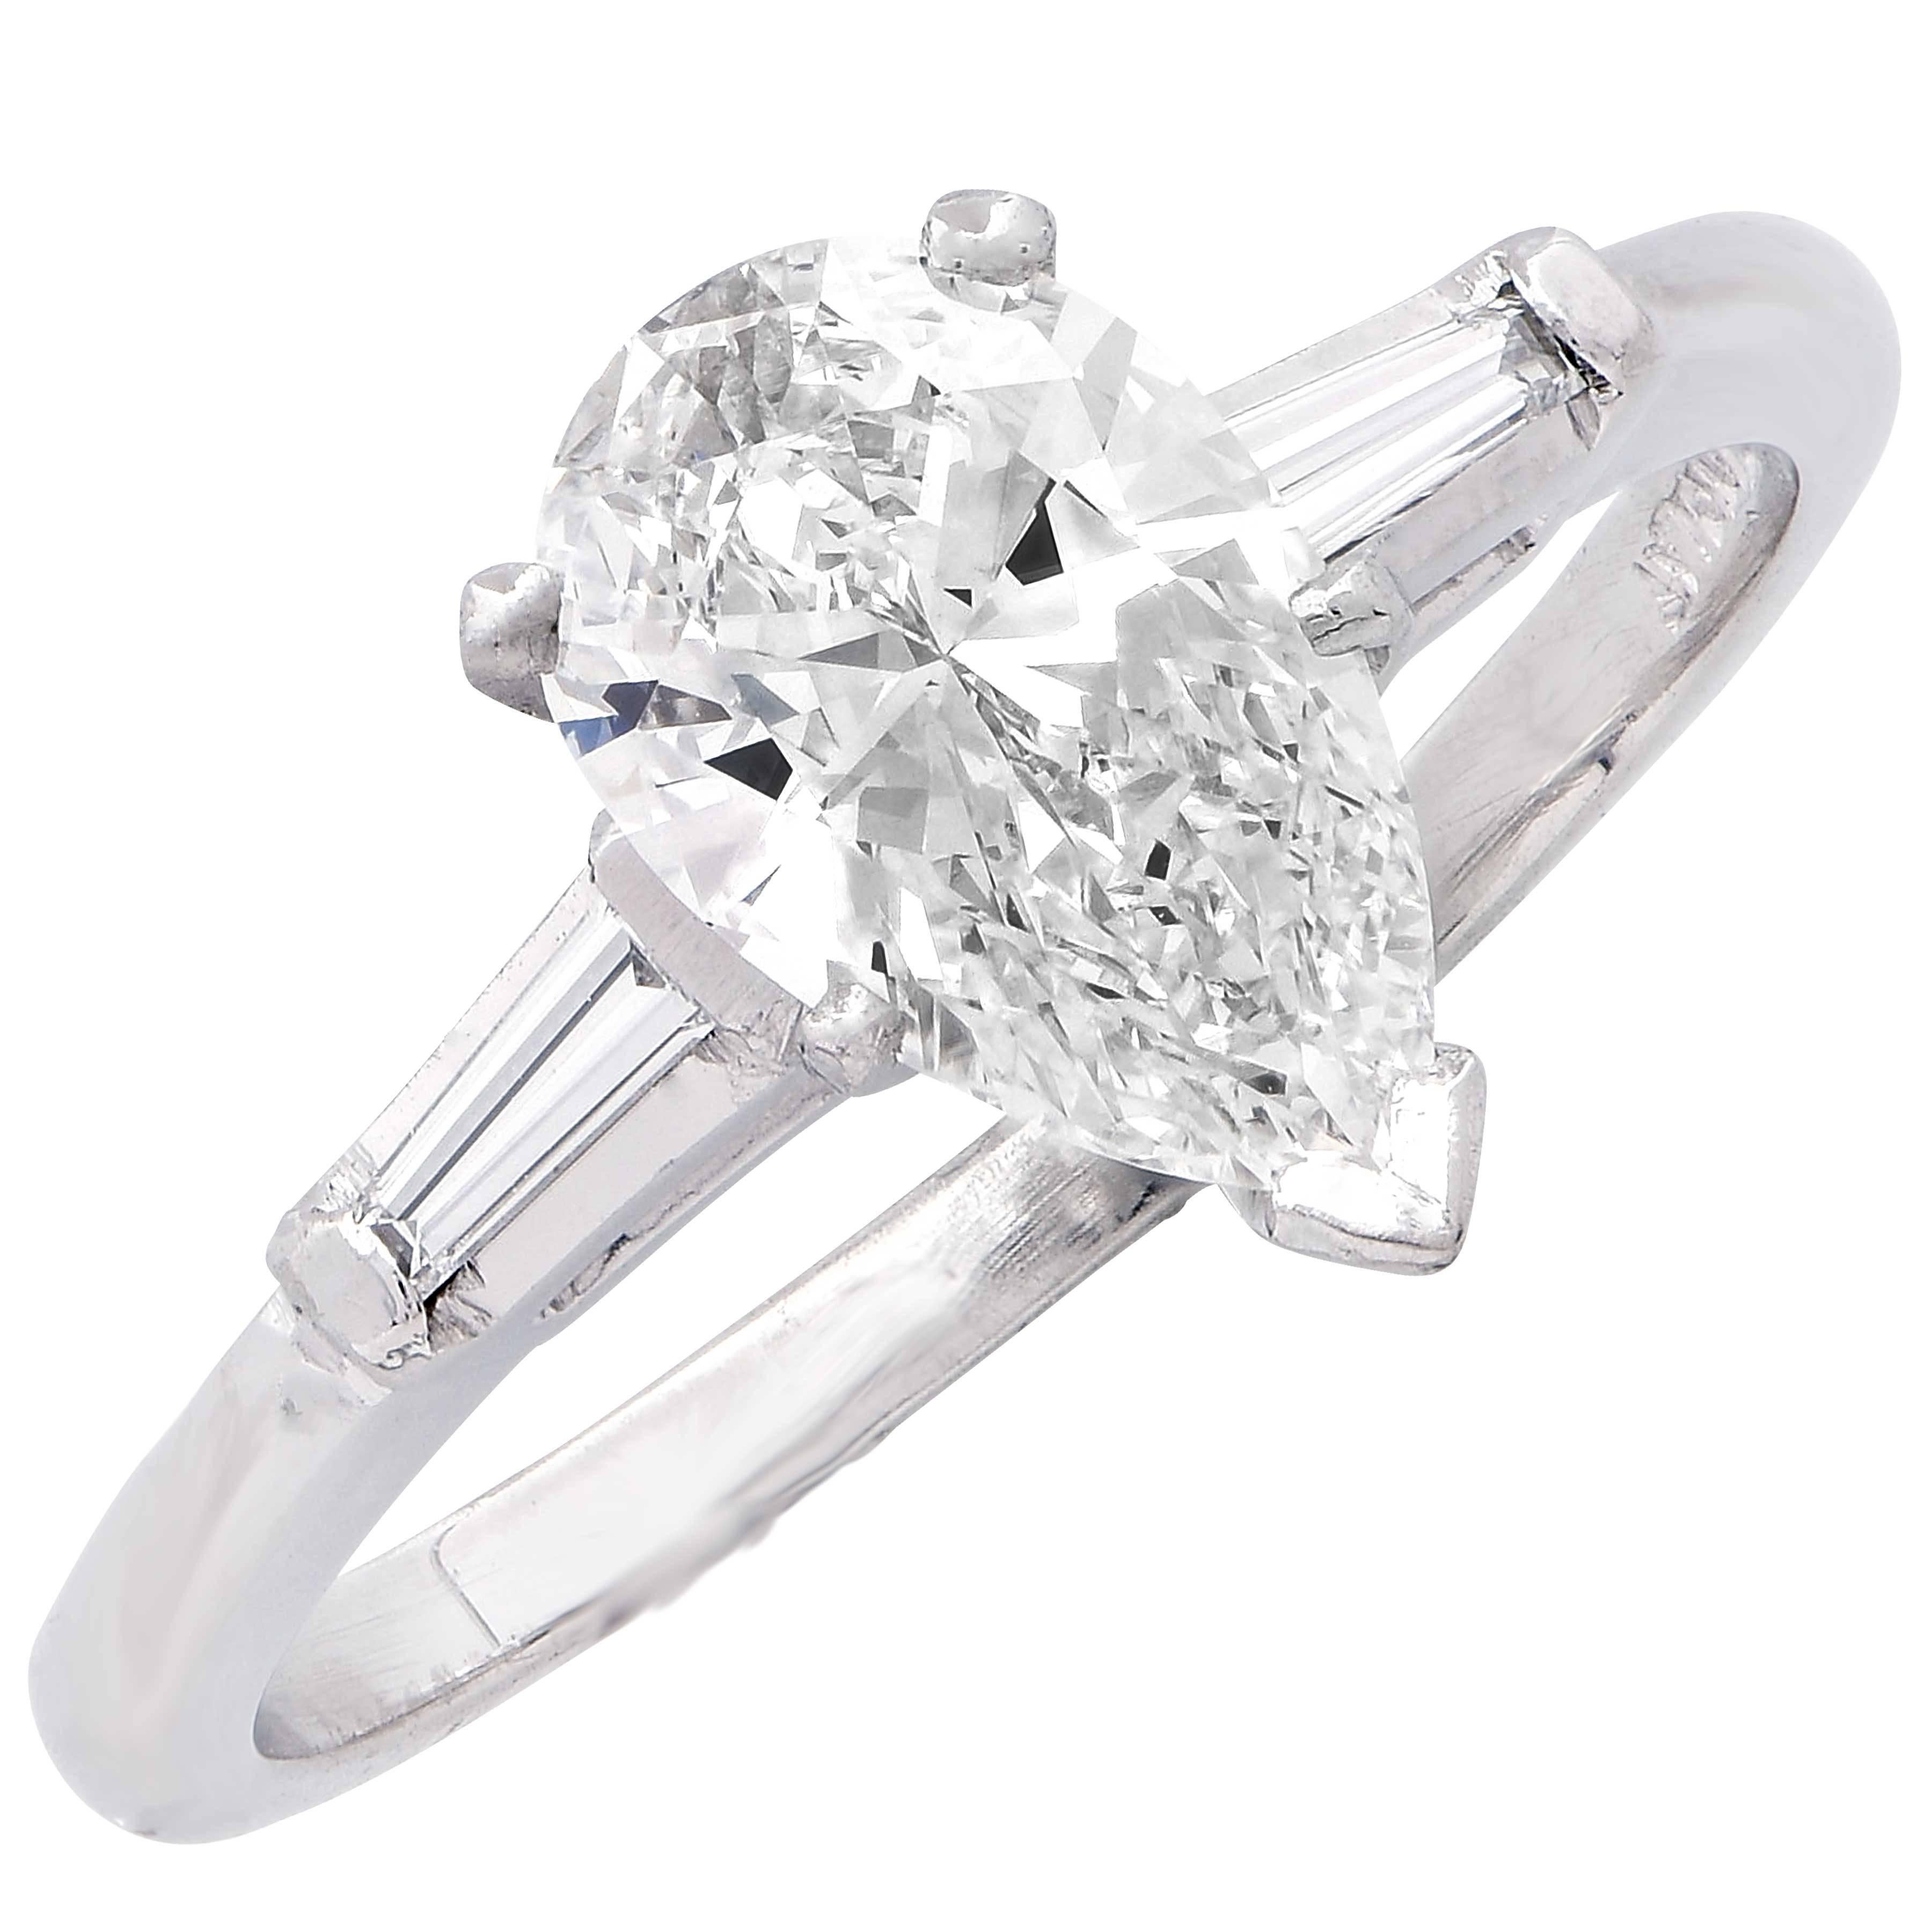 Diamond engagement ring set with a pear shape diamond weighing 1.04 carats. The diamond is GIA certified, color-G and clarity VS1. The platinum mounting is further set with 2 small tapered baguettes. Size 6. Can be sized with no additional charge. 